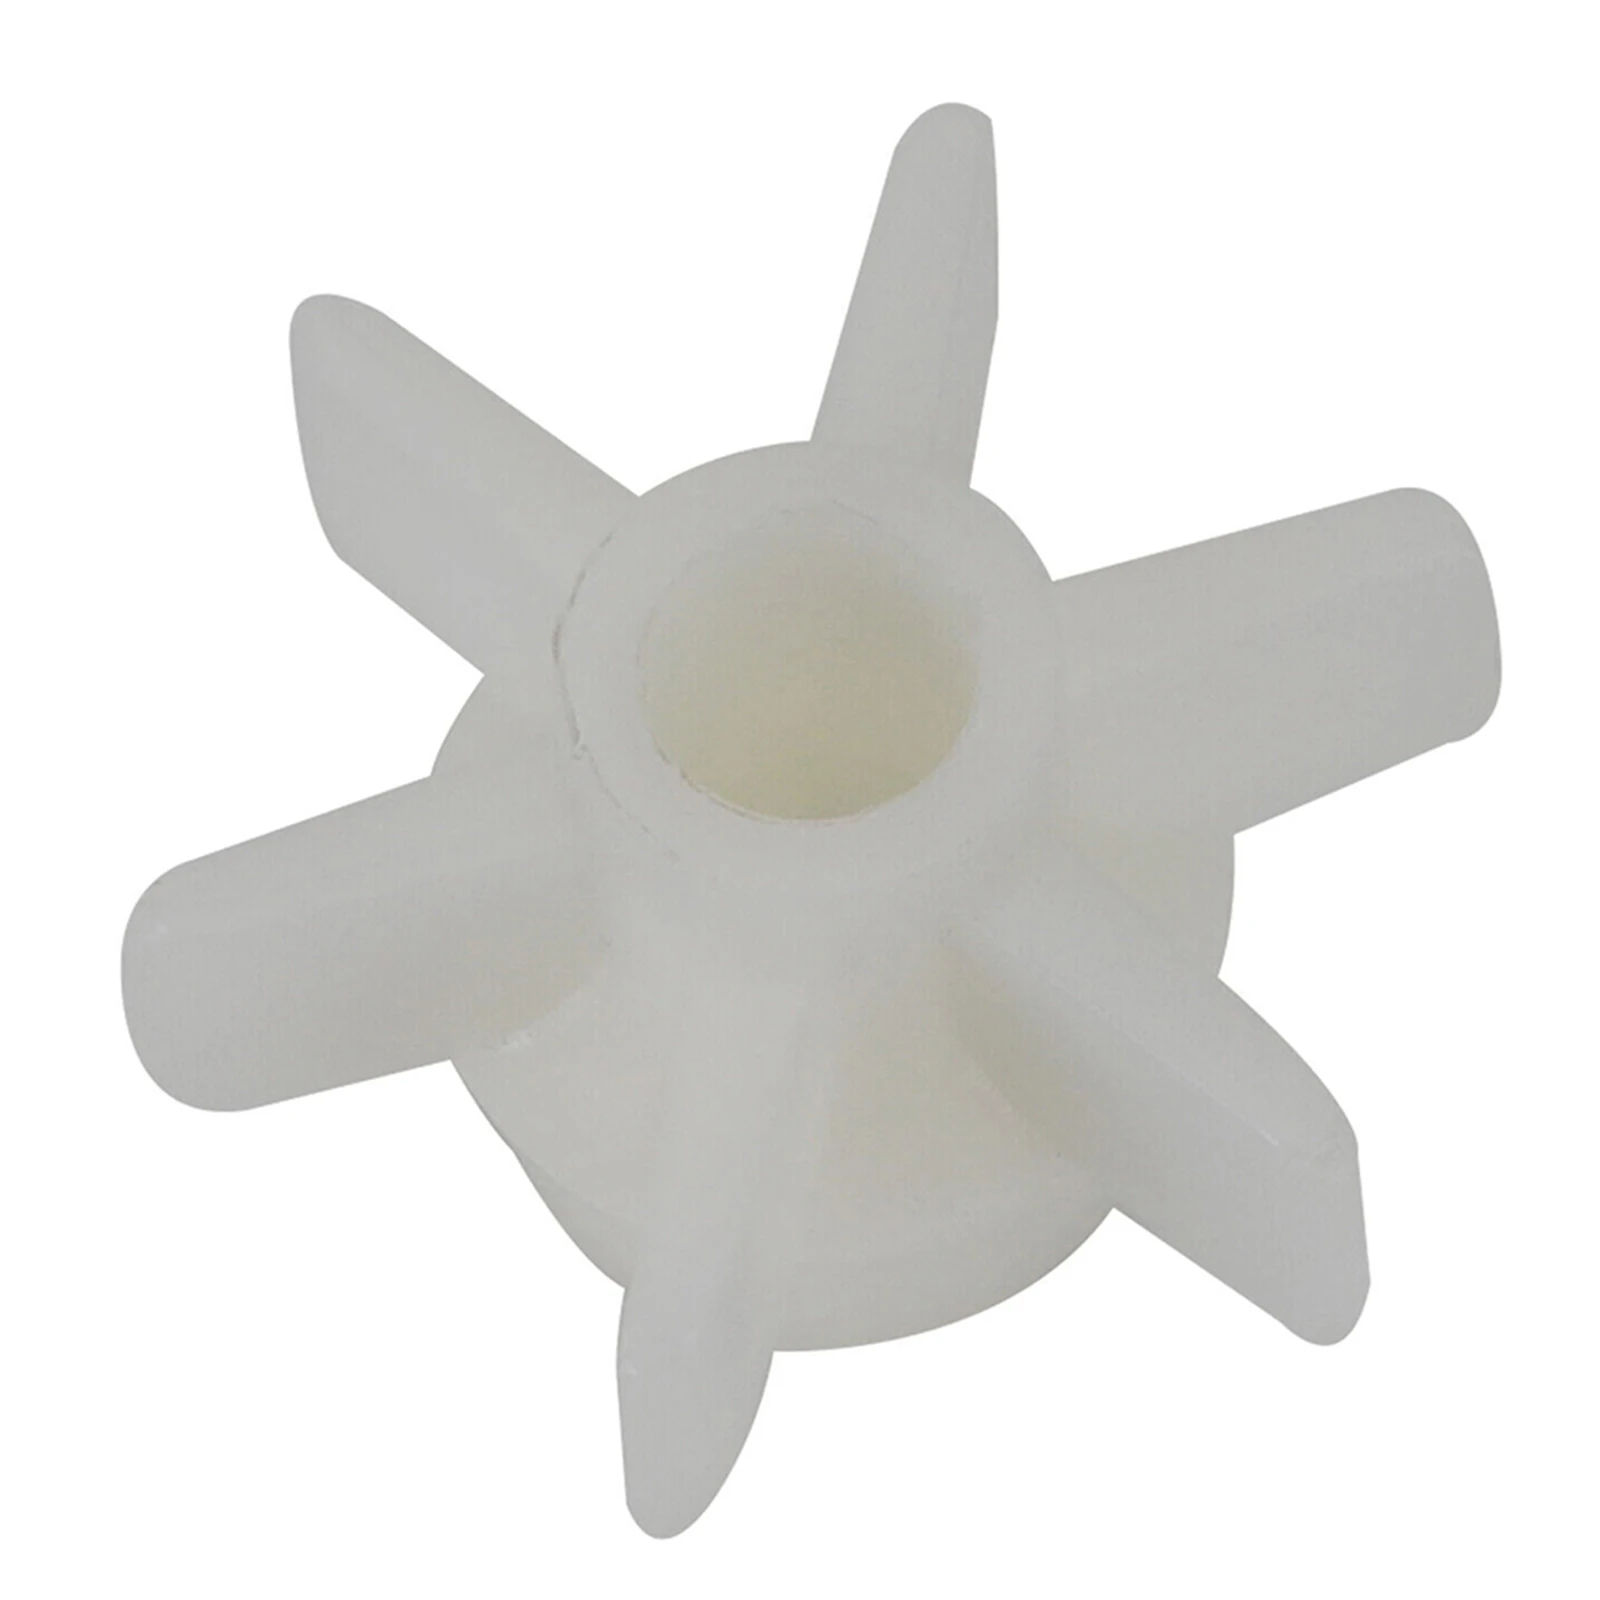 Pump Plastic Impeller Blades Pool Pump Reinforced Impeller For SFX1000 SFX1500+ Gardening Swimming Pool Equipment Parts